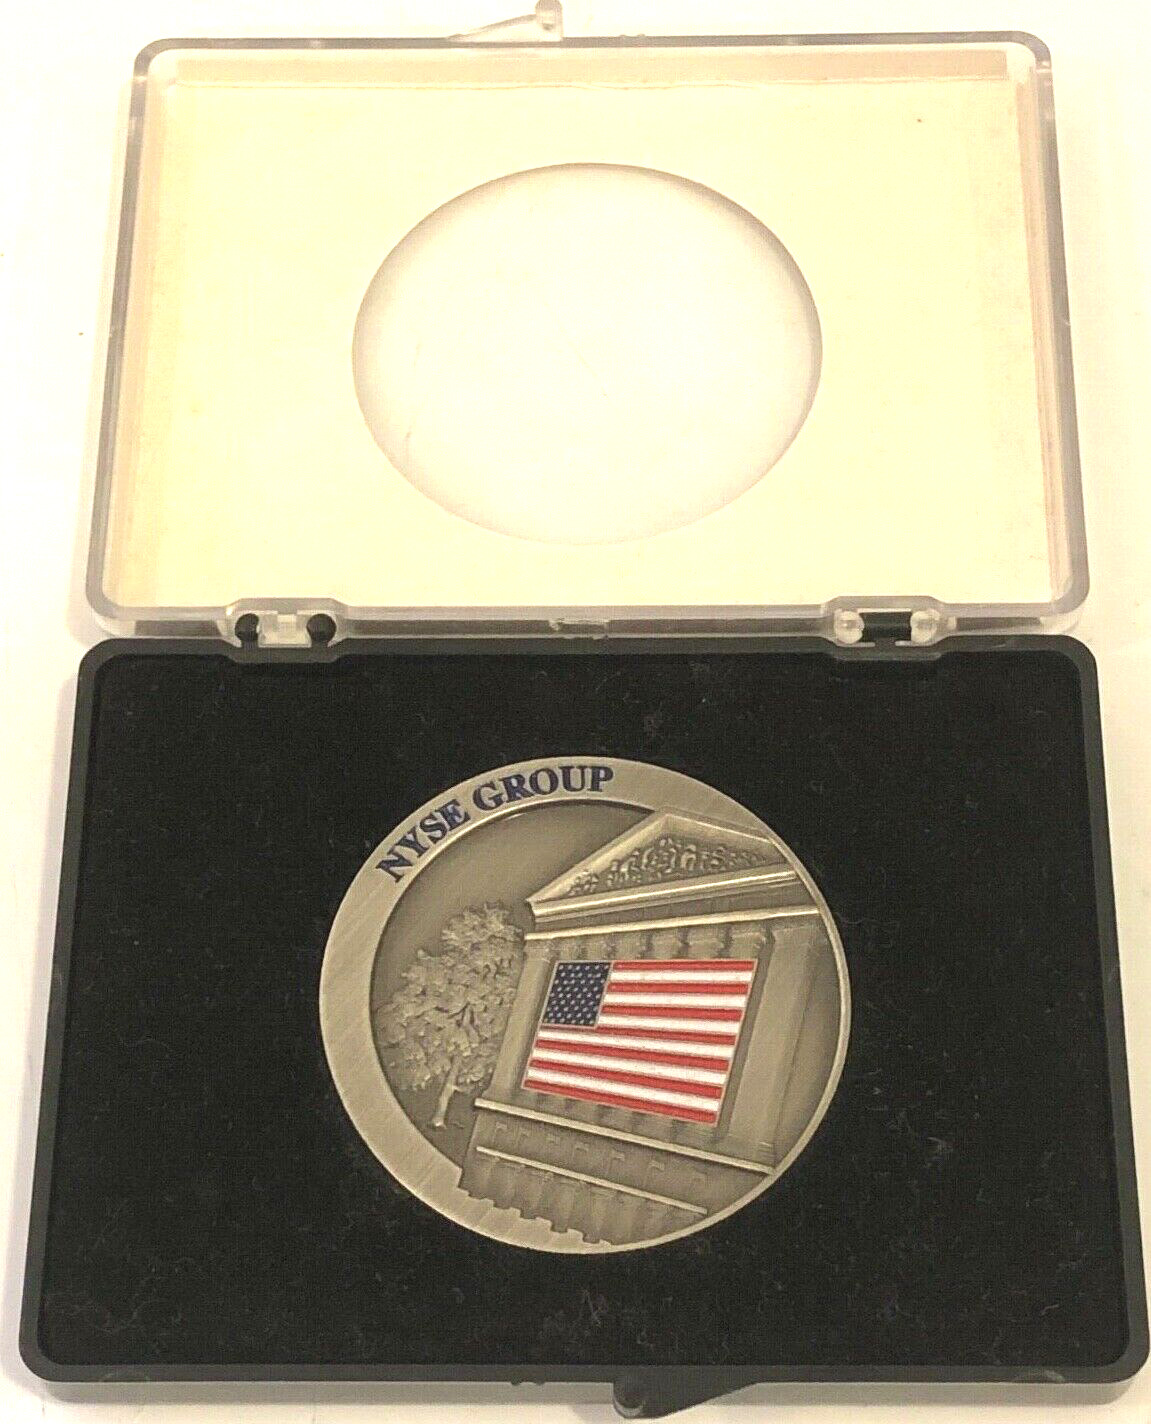 NYX Listed NYSE Group The New York Stock Exchange Original Listing \'06 Medallion